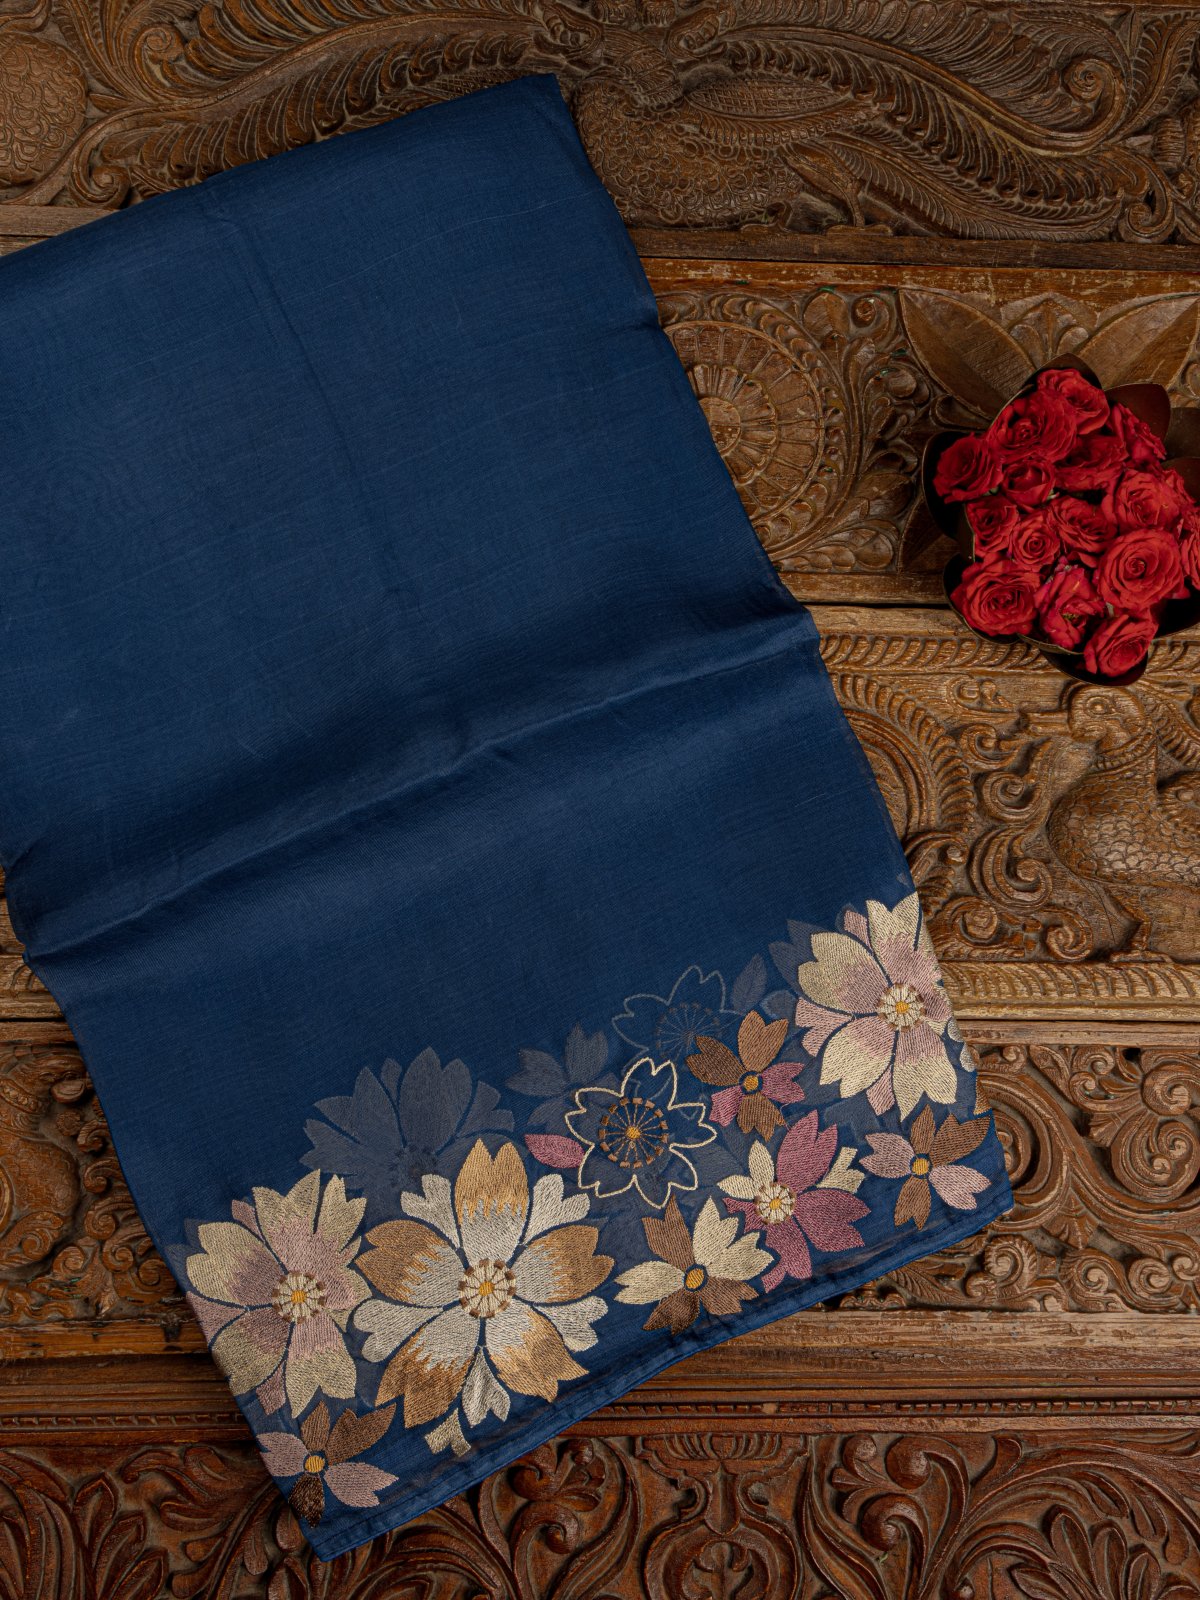 Blue Organza Saree With Floral Embroidered Border